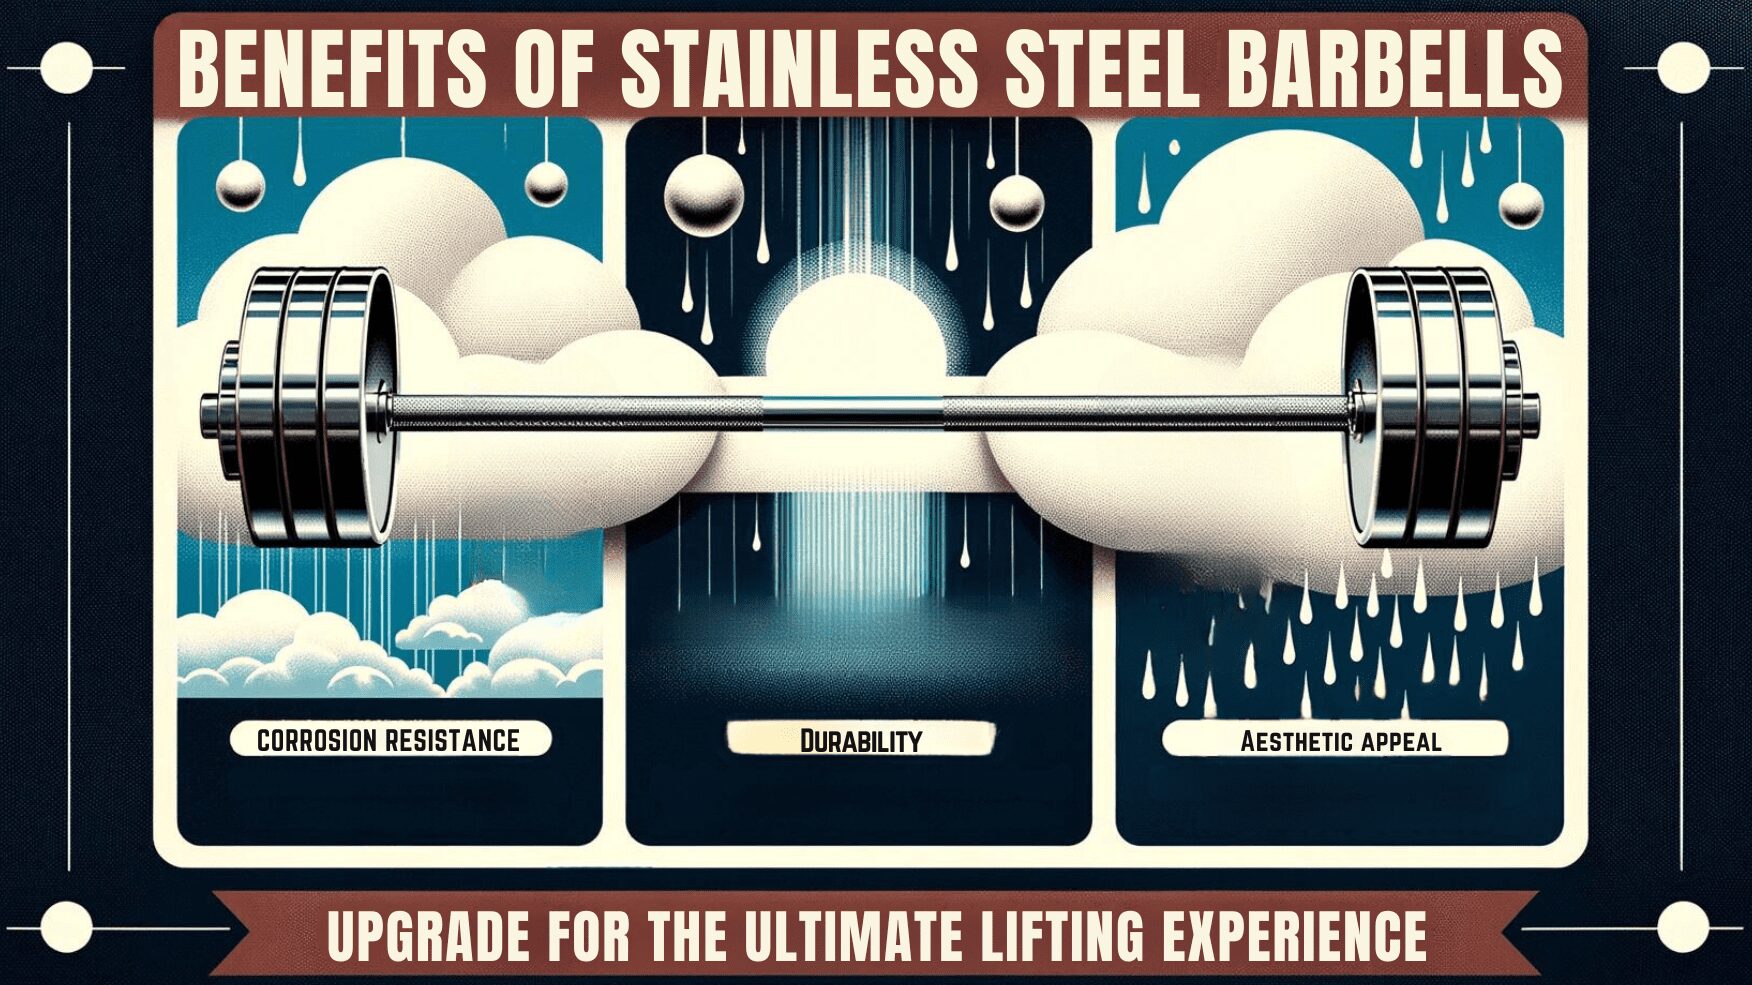 Educational visual: 'Benefits of Stainless Steel Barbells' is written at the top. Three segments show: A barbell in a rain cloud, staying rust-free for 'Corrosion Resistance', a barbell lifting massive weights for 'Durability', and a polished barbell reflecting light for 'Aesthetic Appeal'. The bottom banner emphasizes, 'Upgrade for the ultimate lifting experience'.